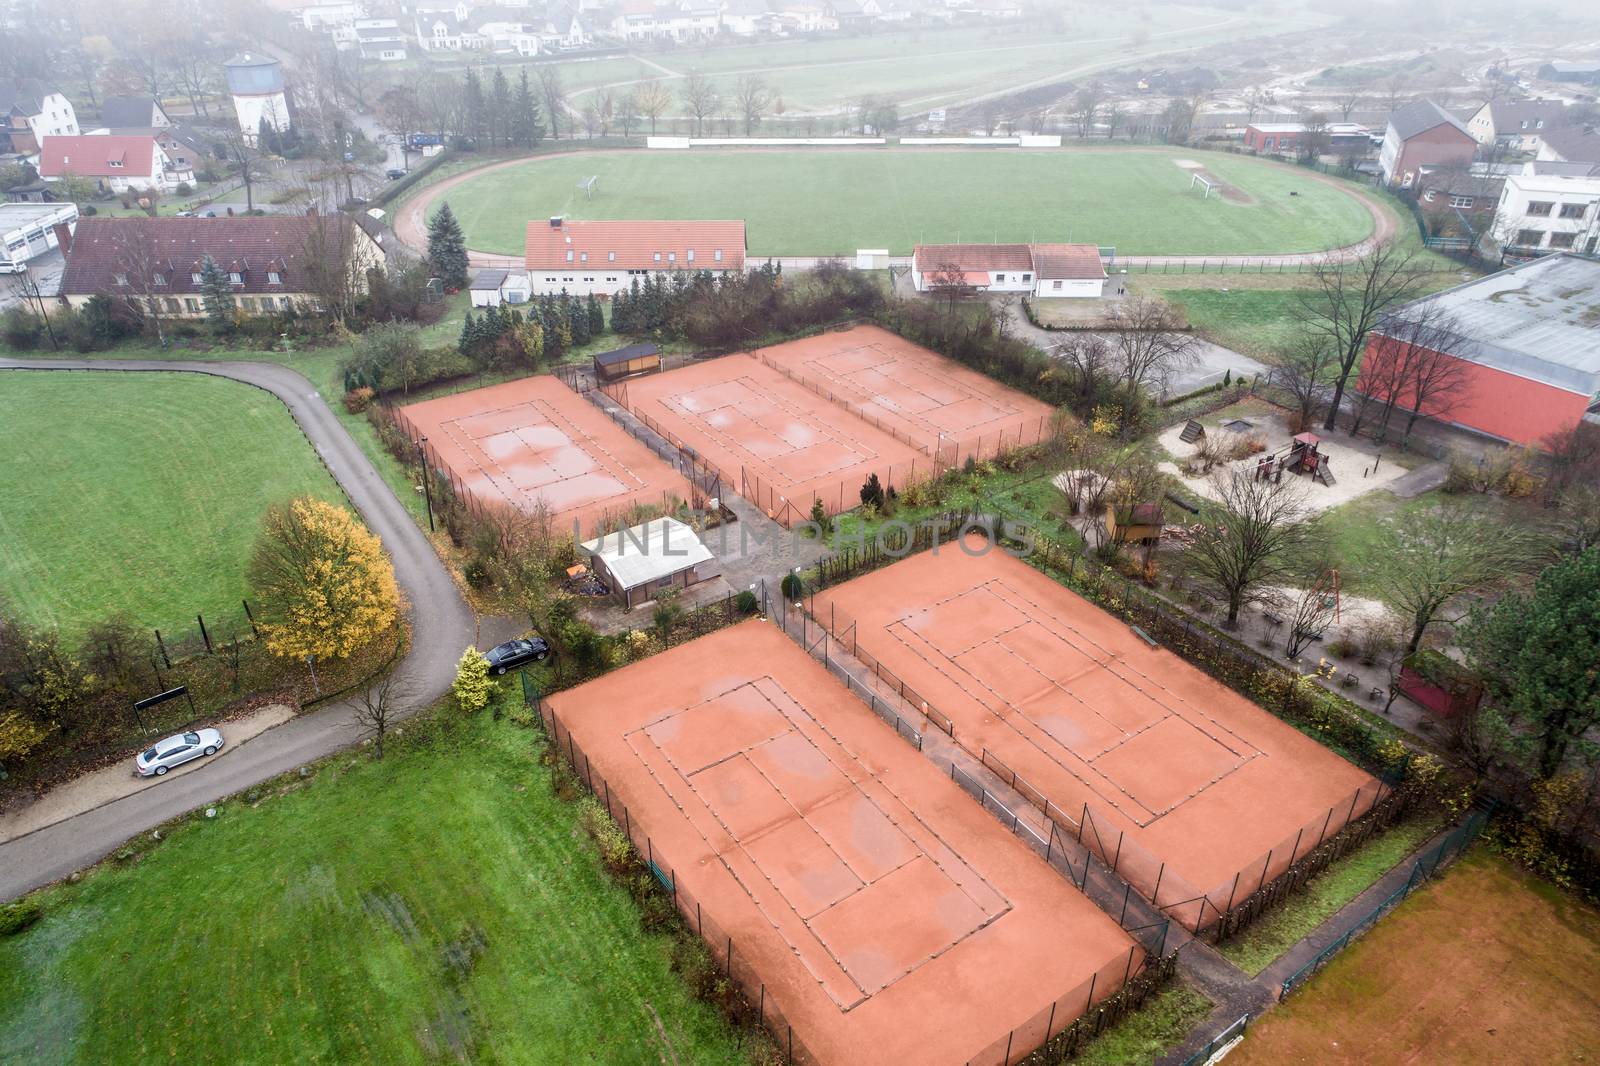 Aerial view of tennis courts during autumn with dismantled nets. by geogif